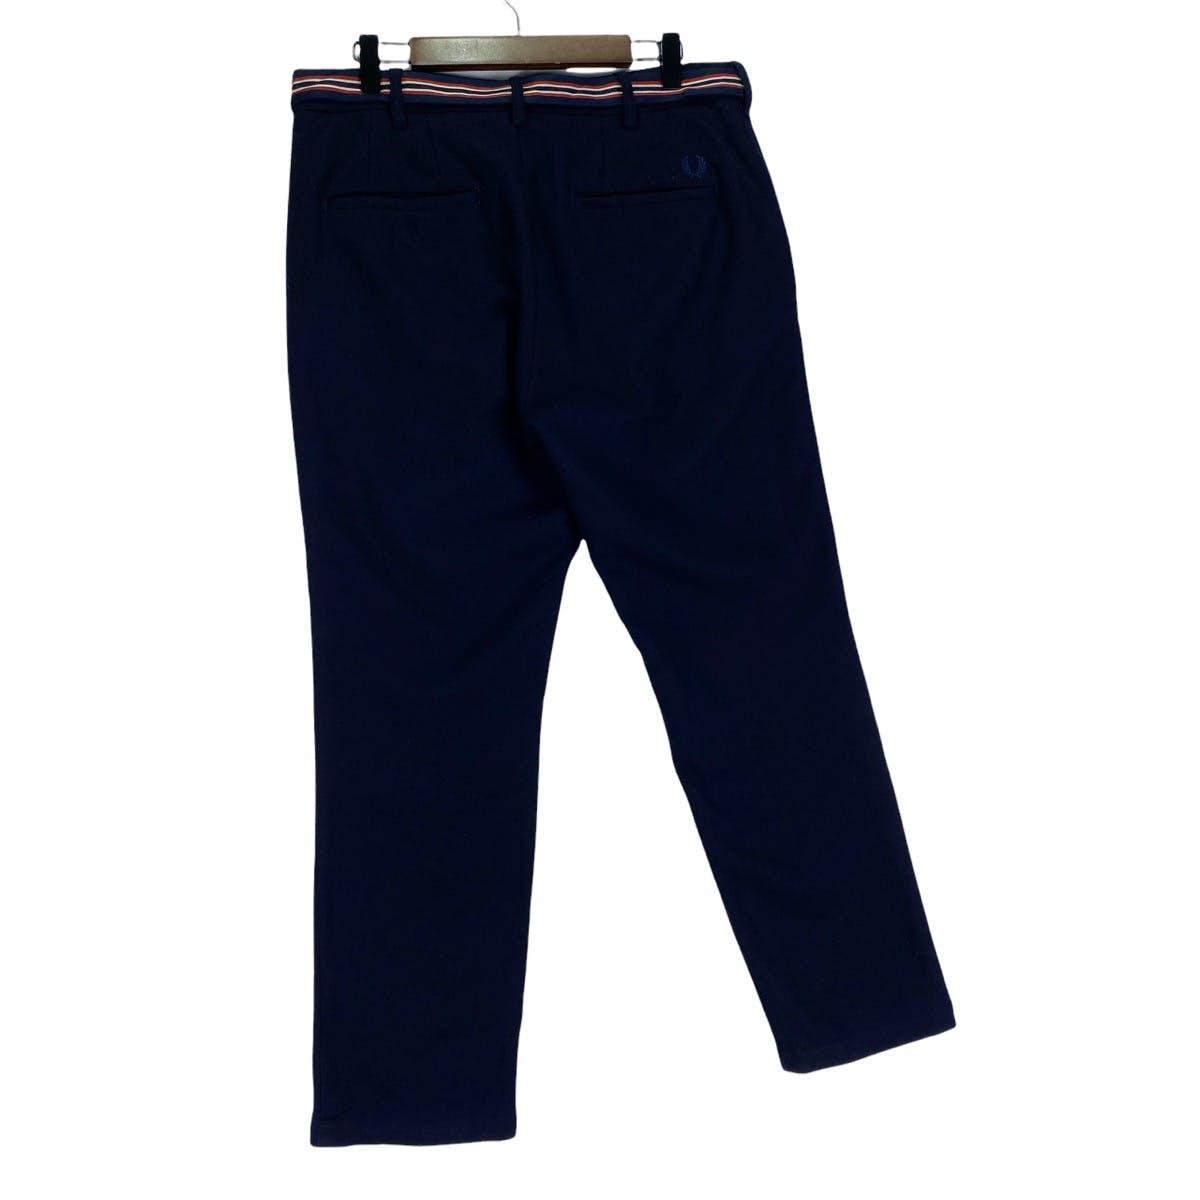 Fred Perry Navy Blue Trouser - 11